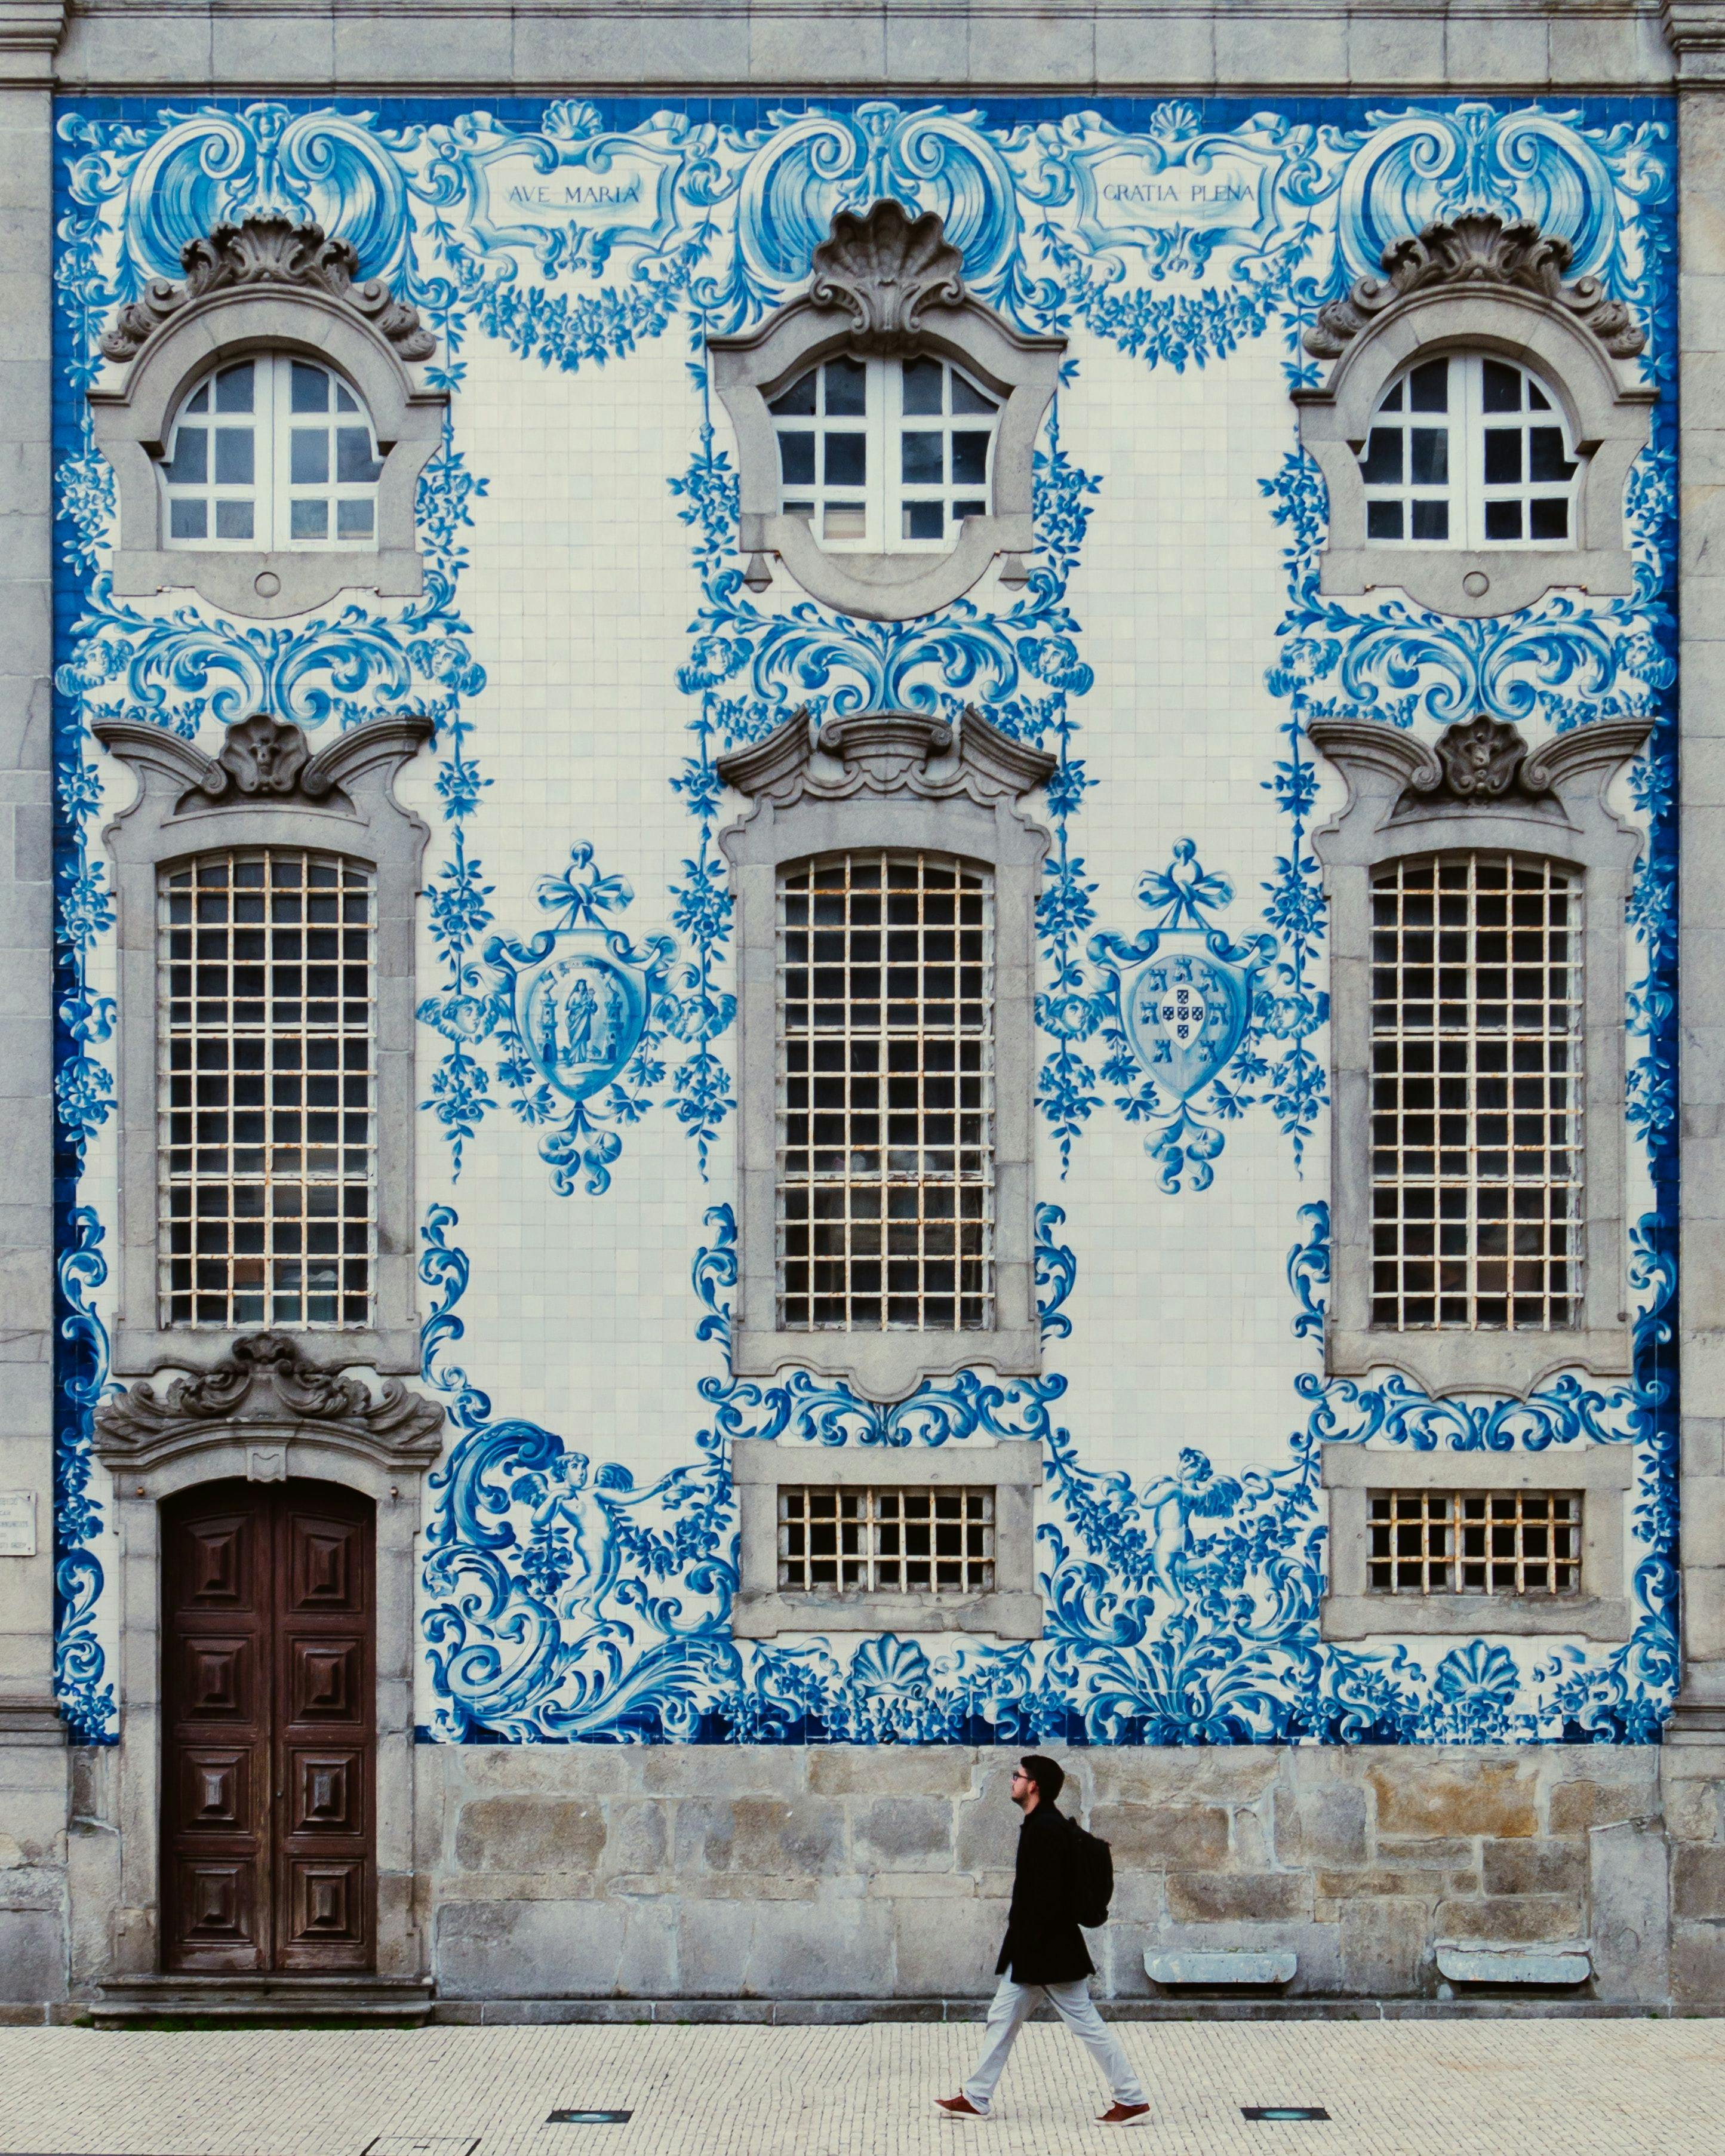 Wall decorated with azulejos in Porto, Portugal.